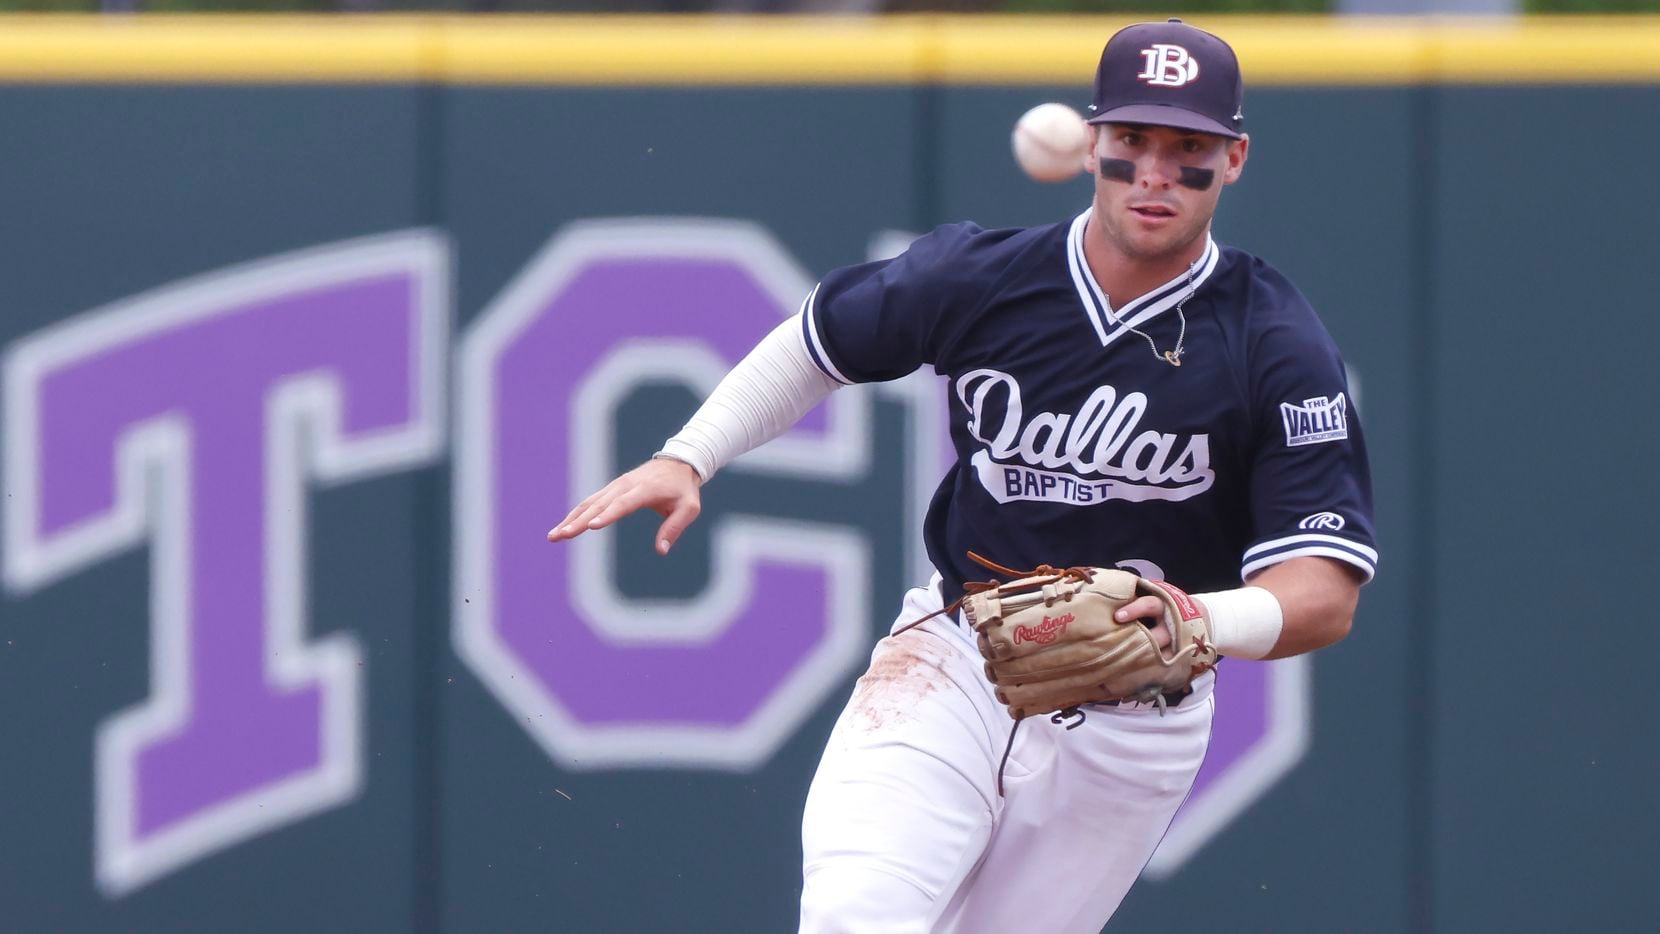 A trip to super regionals is validation for Dallas Baptist, but ...